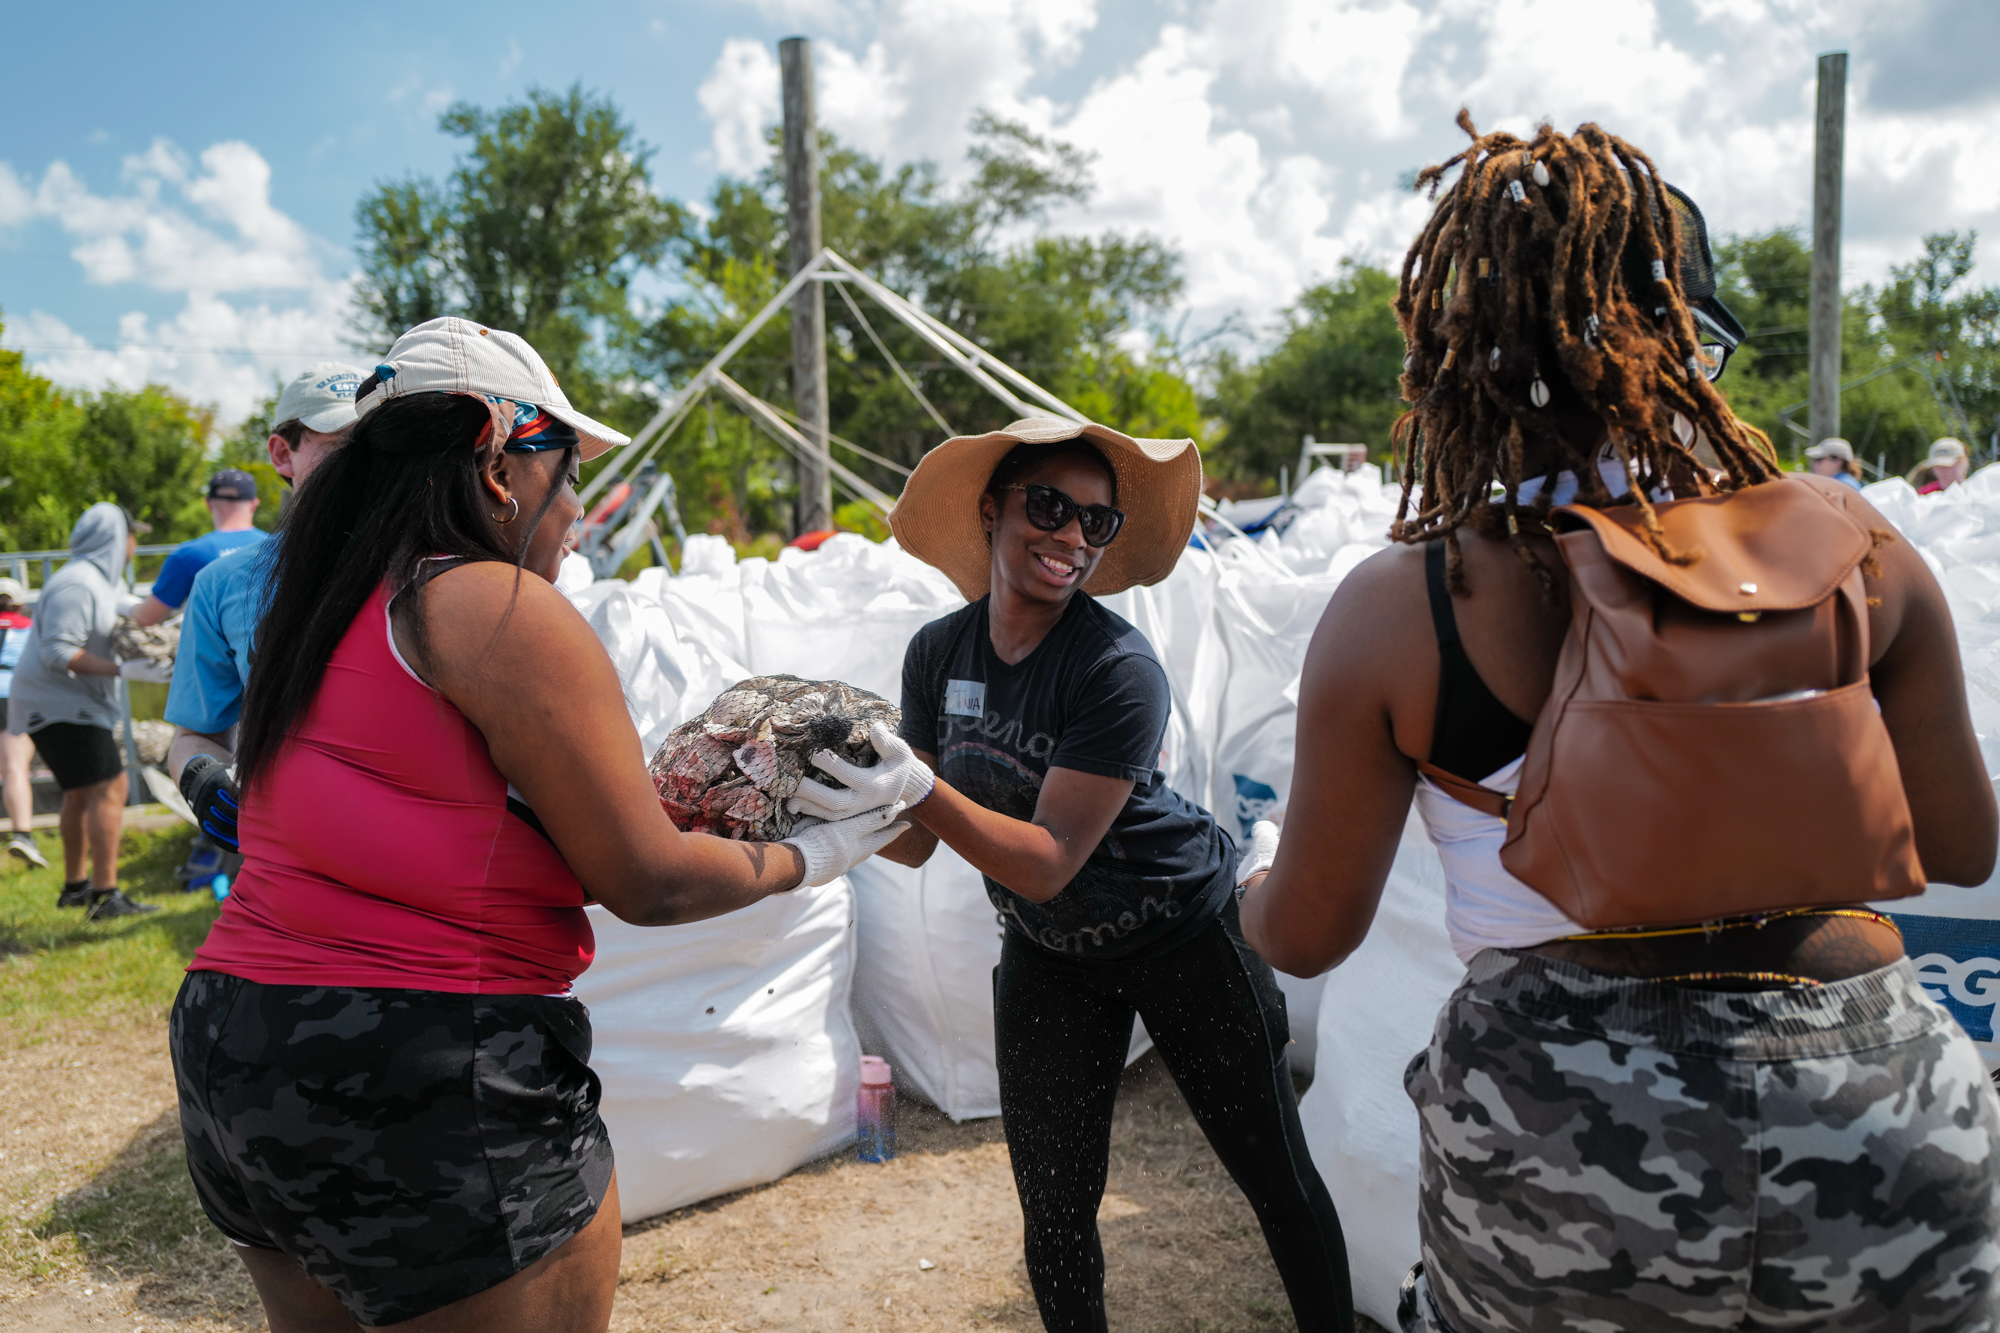 Volunteers gather bags of oyster shells to help protect ancient burial mounds belonging to the Pointe-au-Chien Tribe. (Photo: Coalition to Restore Coastal Louisiana)